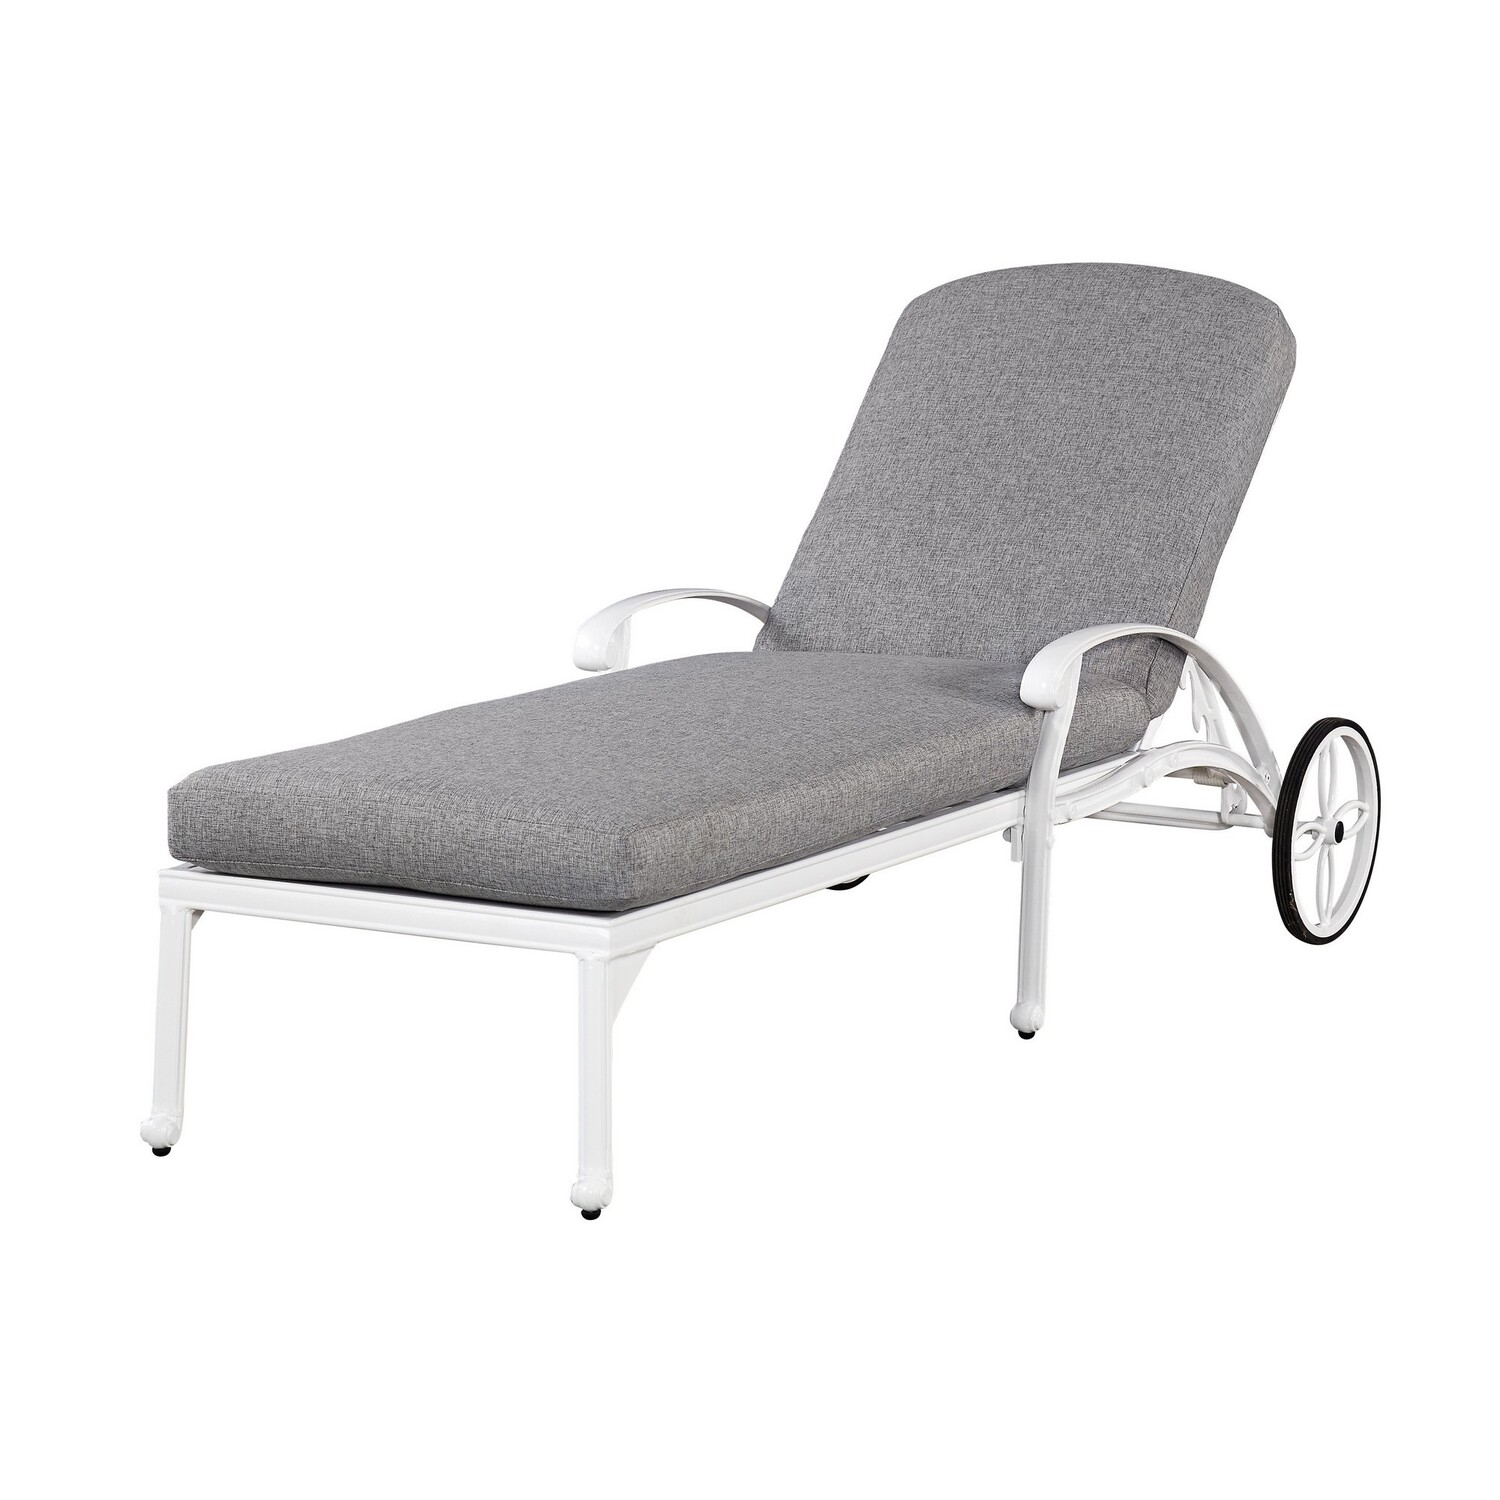 Homestyles Capri Aluminum Outdoor Chaise Lounge in White - image 1 of 2